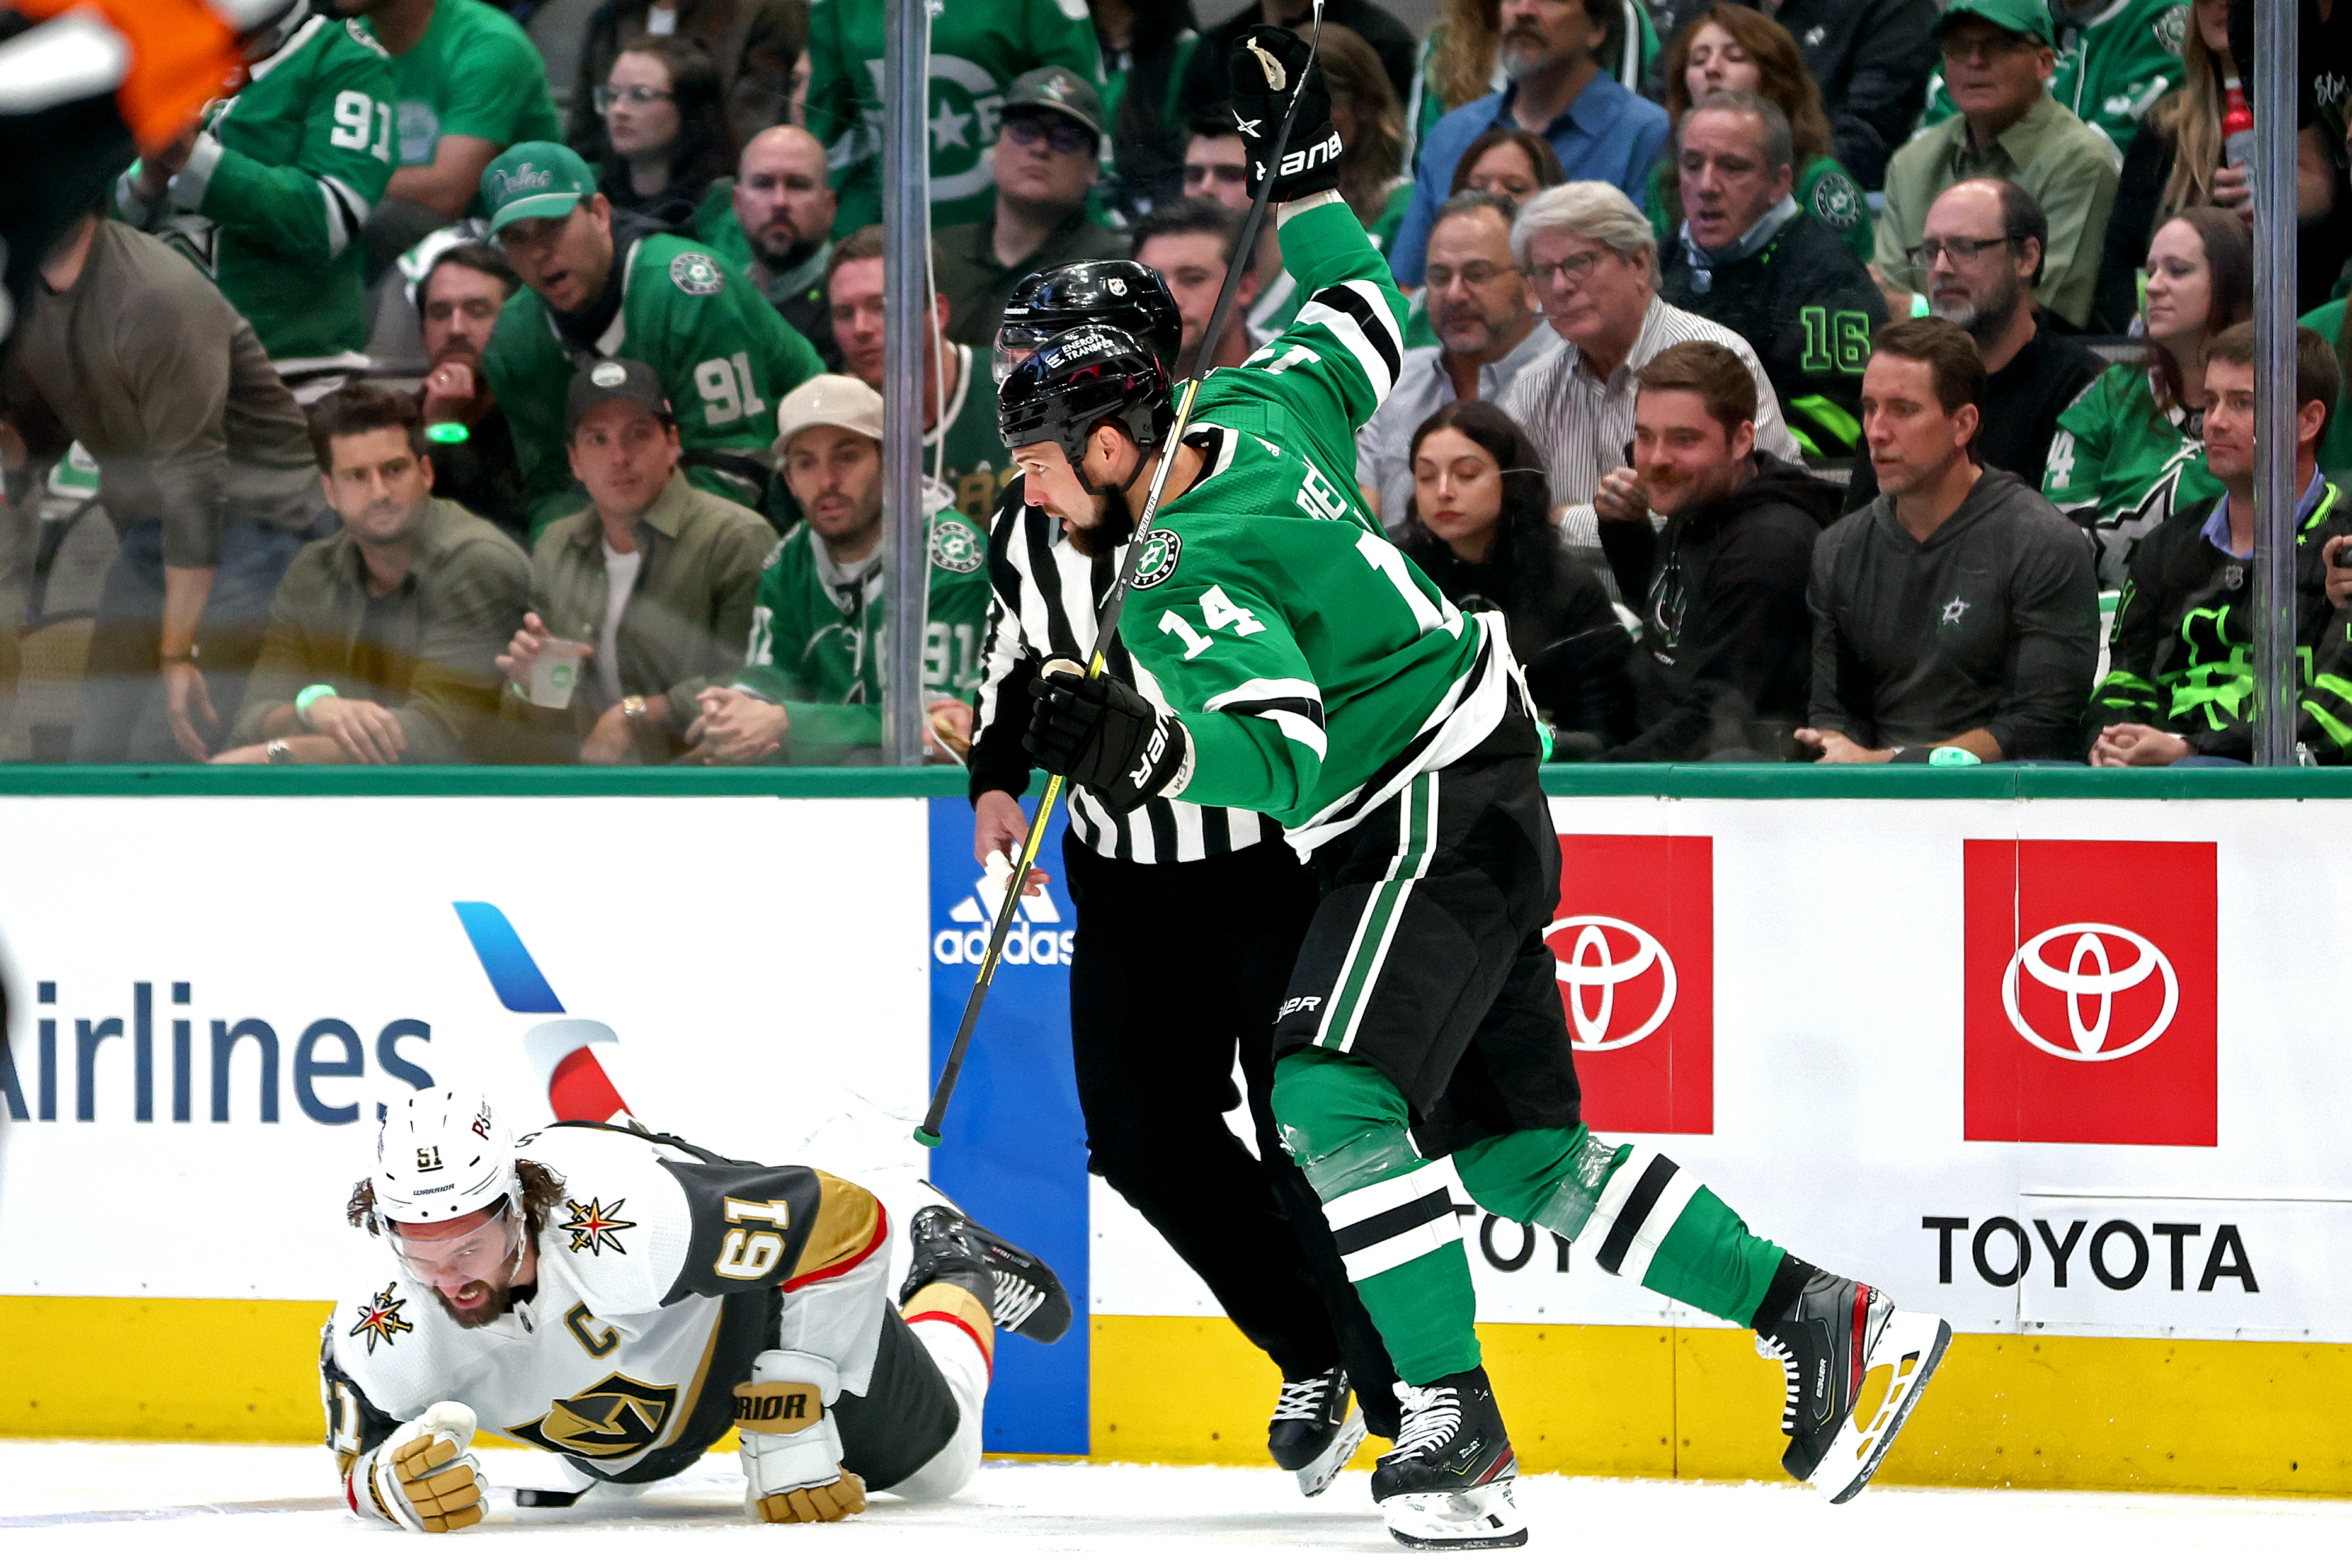 Mark Stone on Jamie Benn getting back in the lineup for game 6 after b